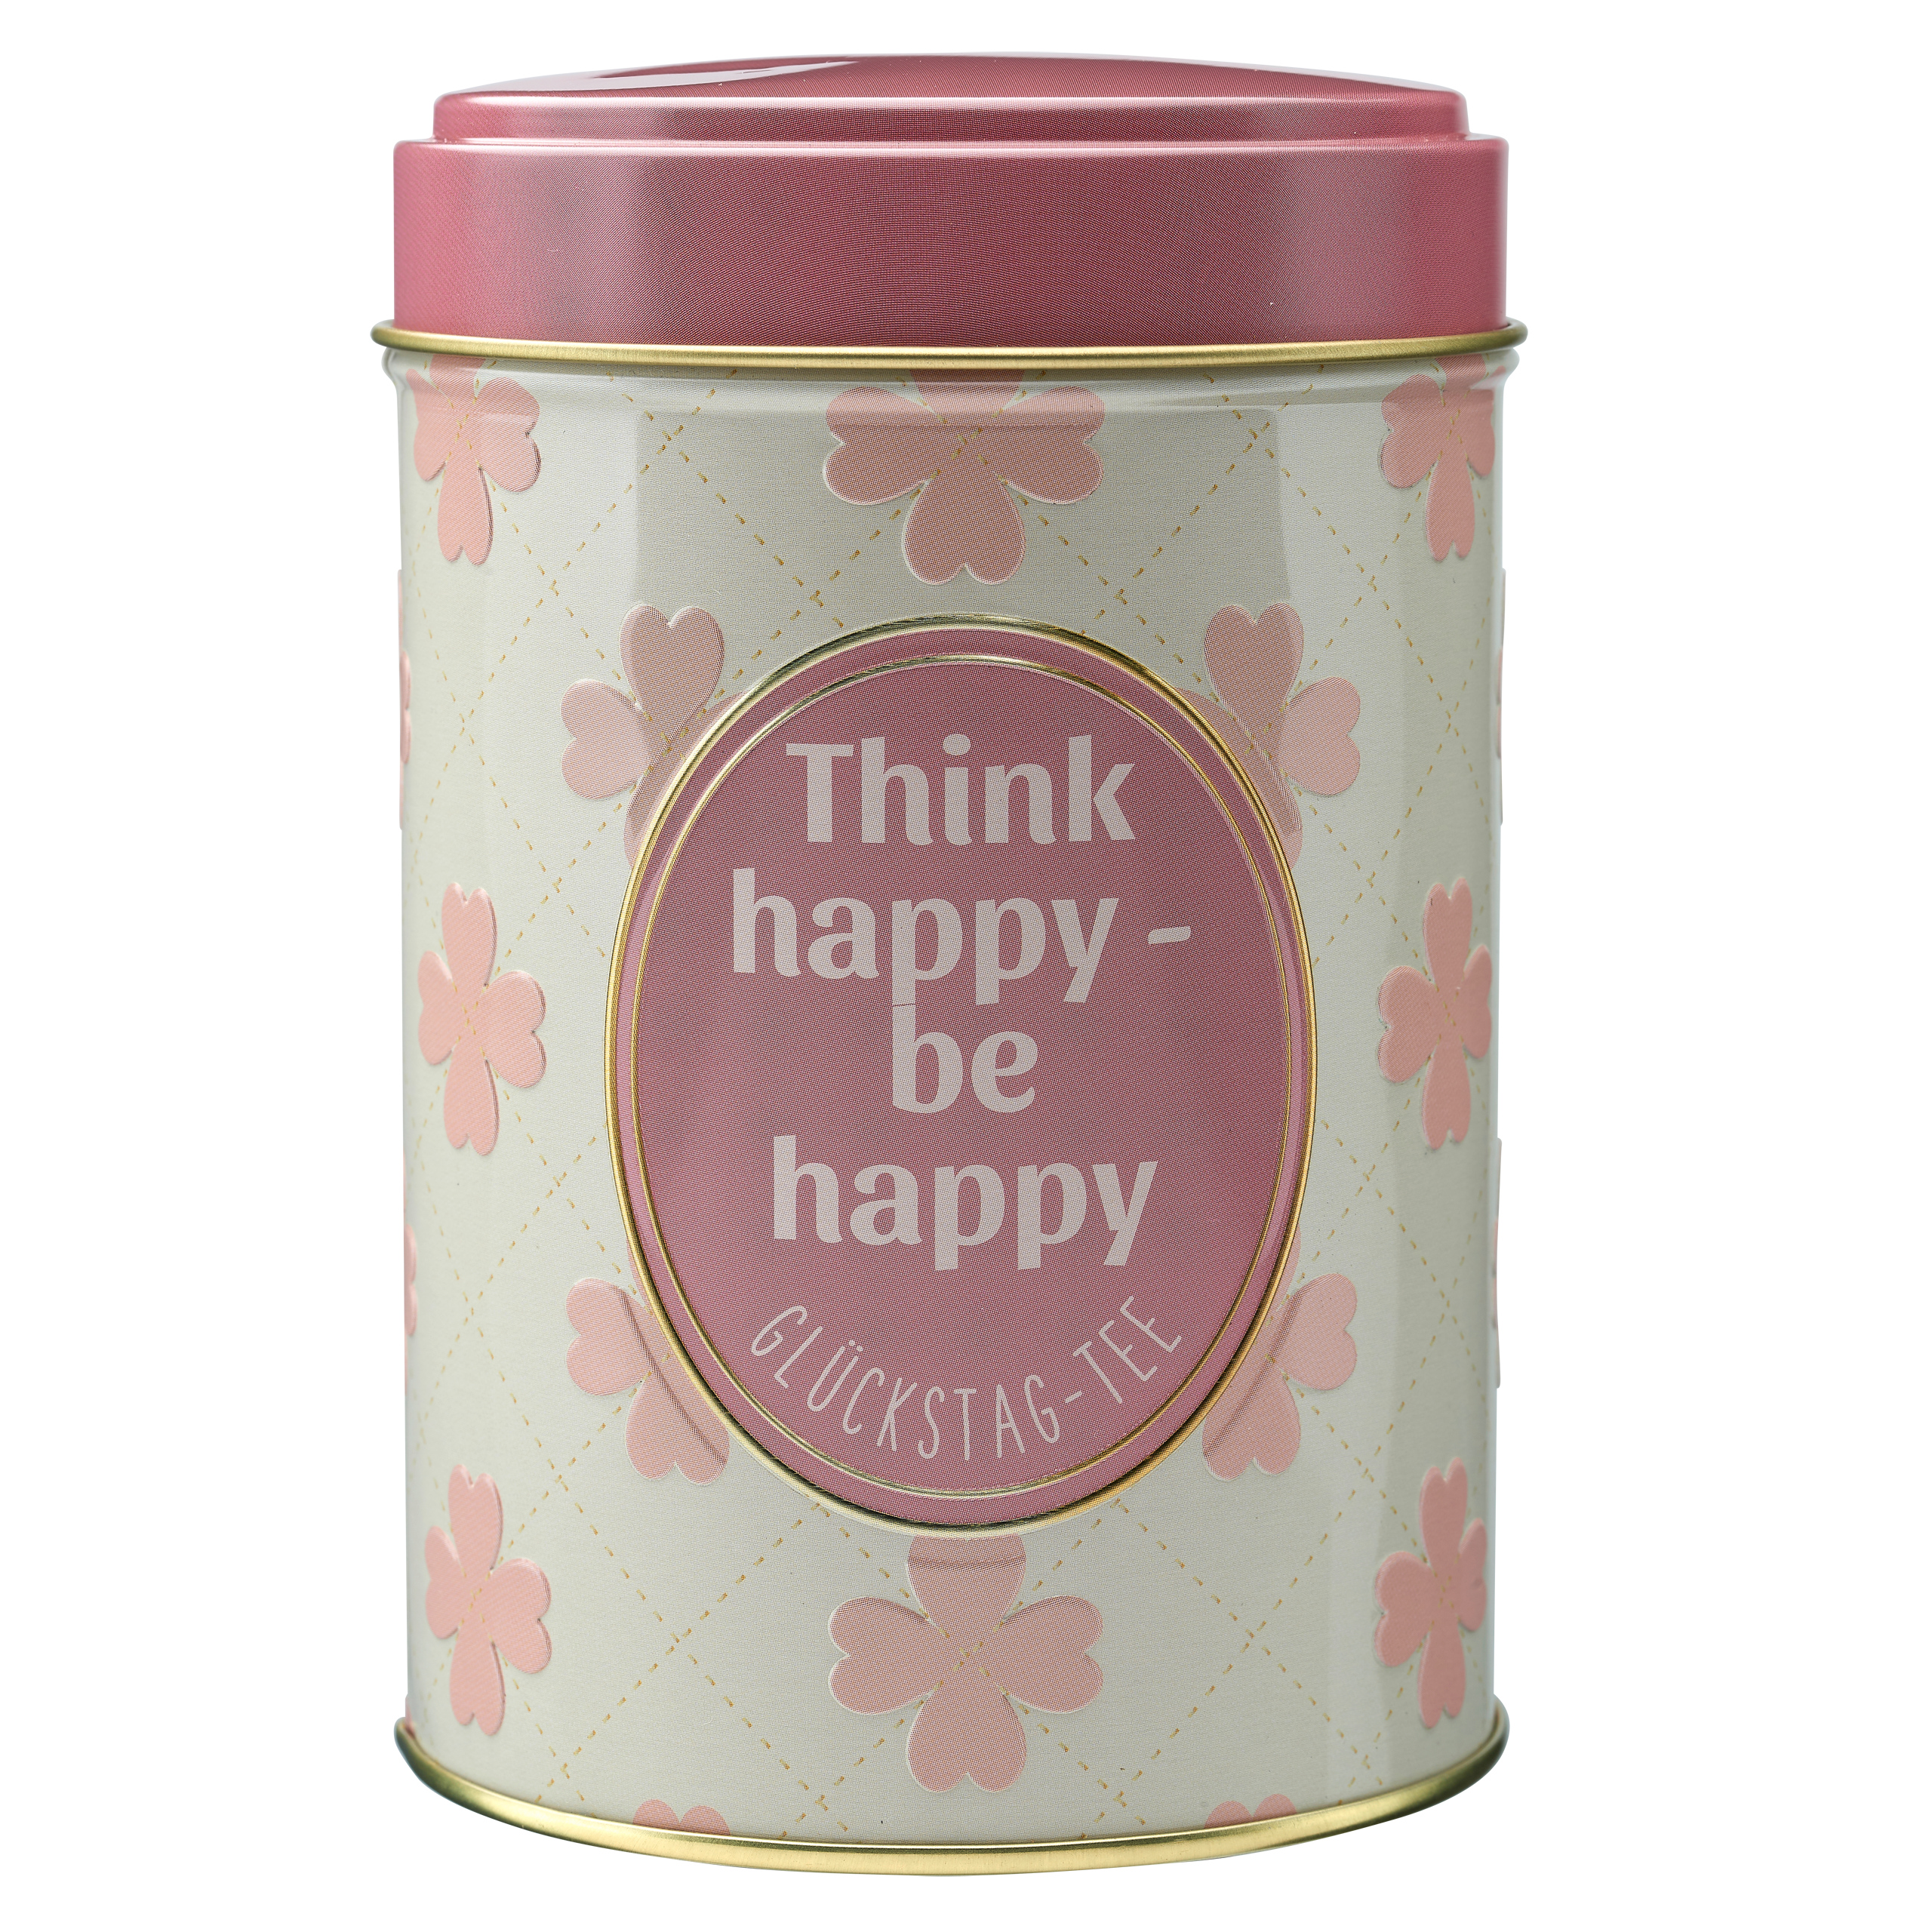 ROOST Boîte à the 9186 Think happy - be happy Think happy - be happy